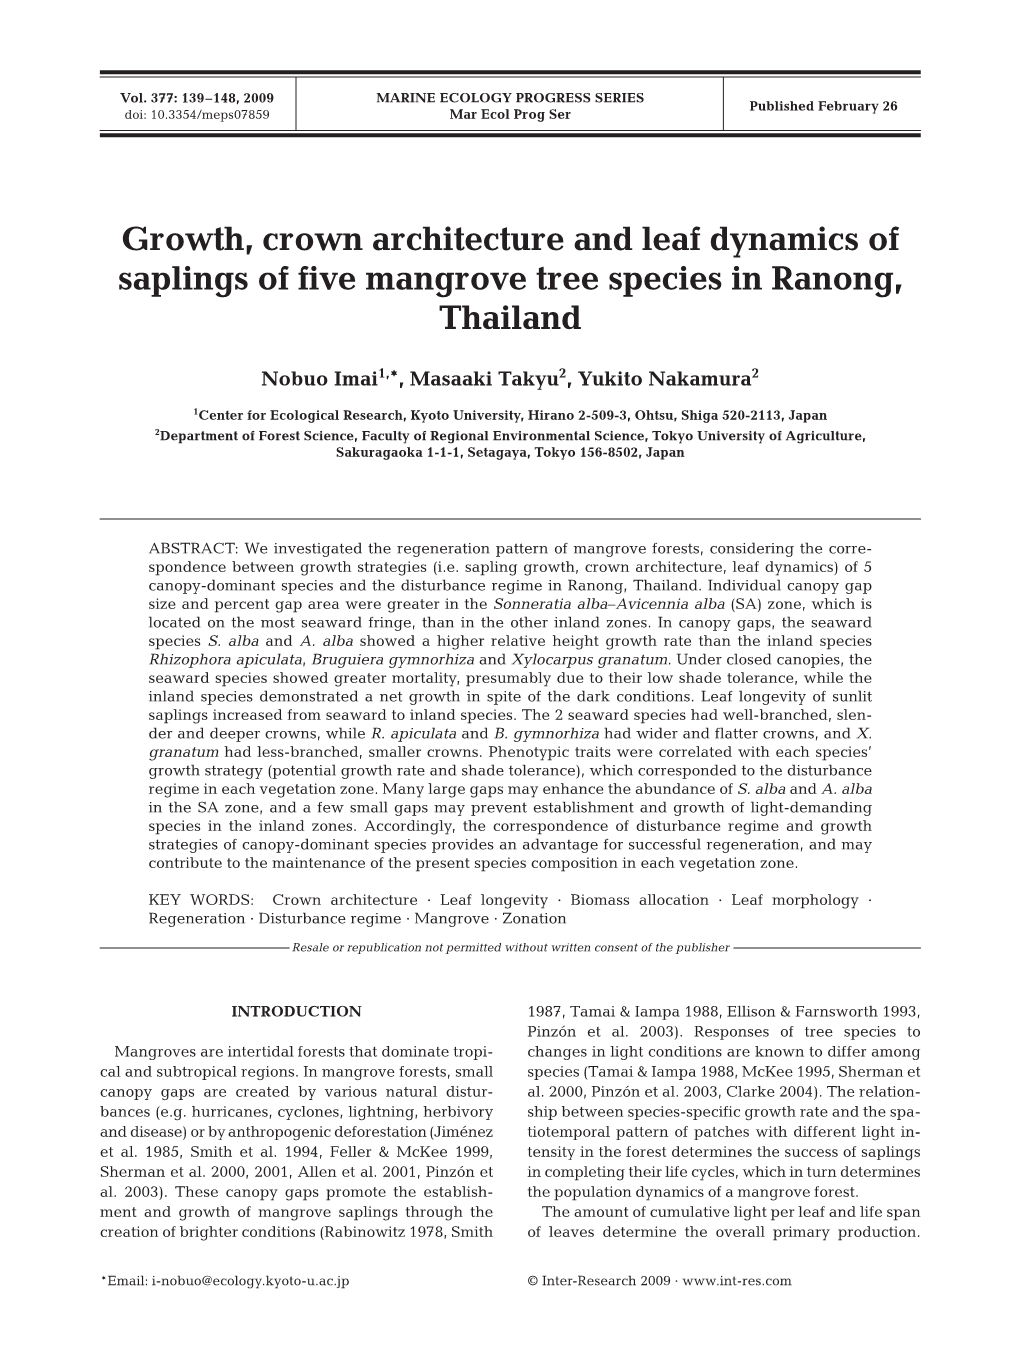 Growth, Crown Architecture and Leaf Dynamics of Saplings of Five Mangrove Tree Species in Ranong, Thailand